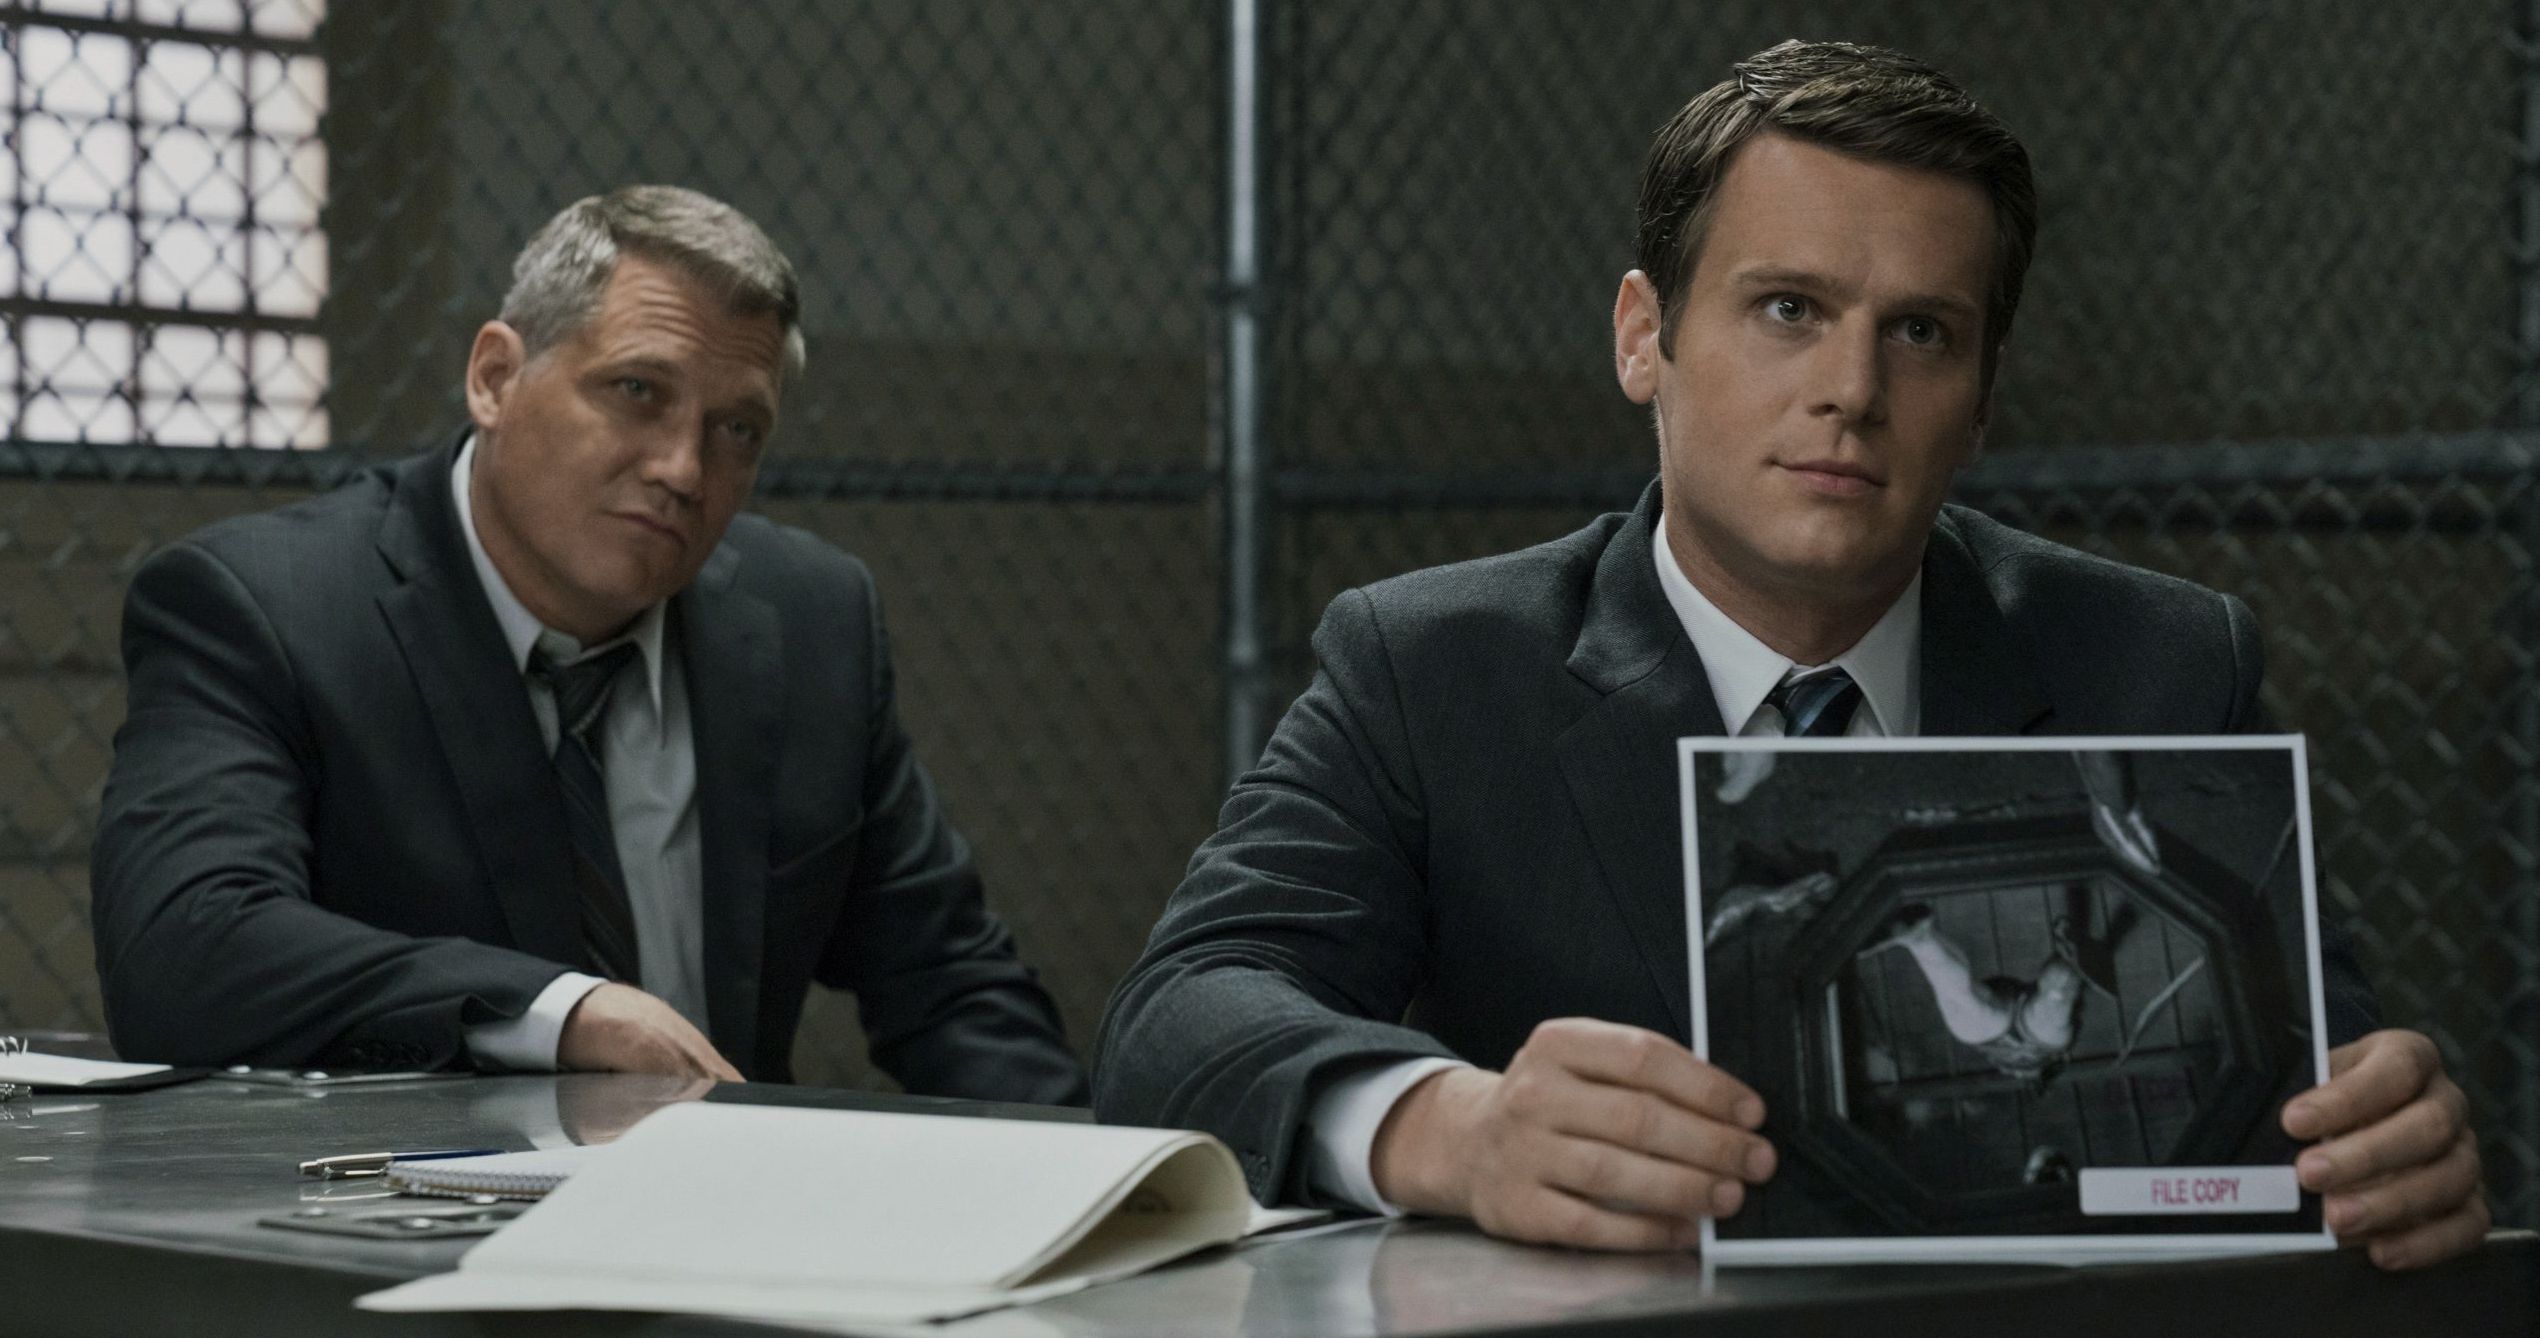 Mindhunter Season 2 Gets a Late Summer Release Date on Netflix